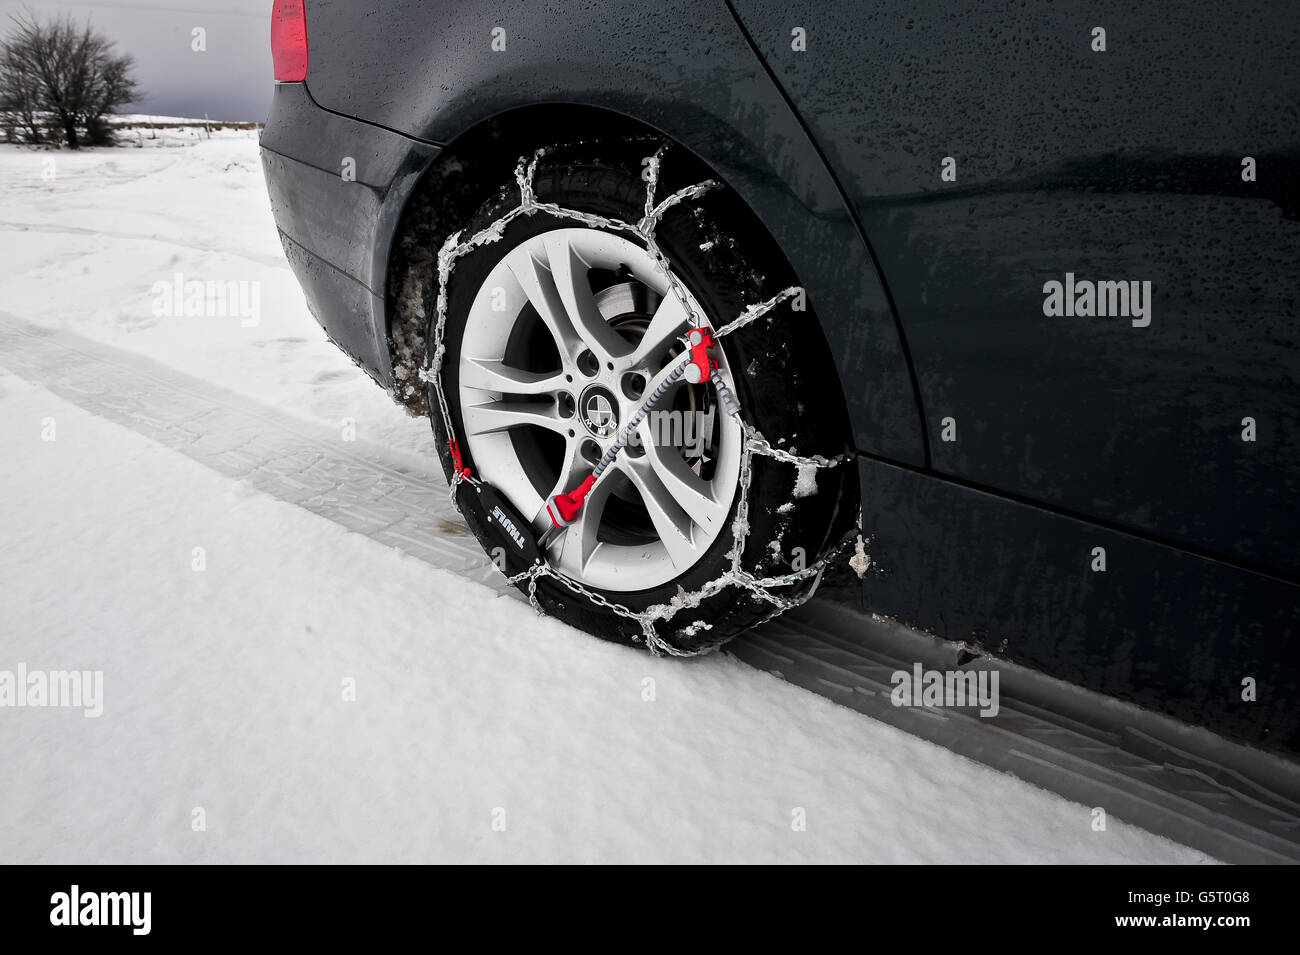 THULE CG-9 Snow-Chains fitted and self-tensioned on the rear driving wheel of a BMW. Snow-Chains help driving through snow, especially on rear wheel drive vehicles, which are much more prone to becoming stuck due to loss of traction. Stock Photo